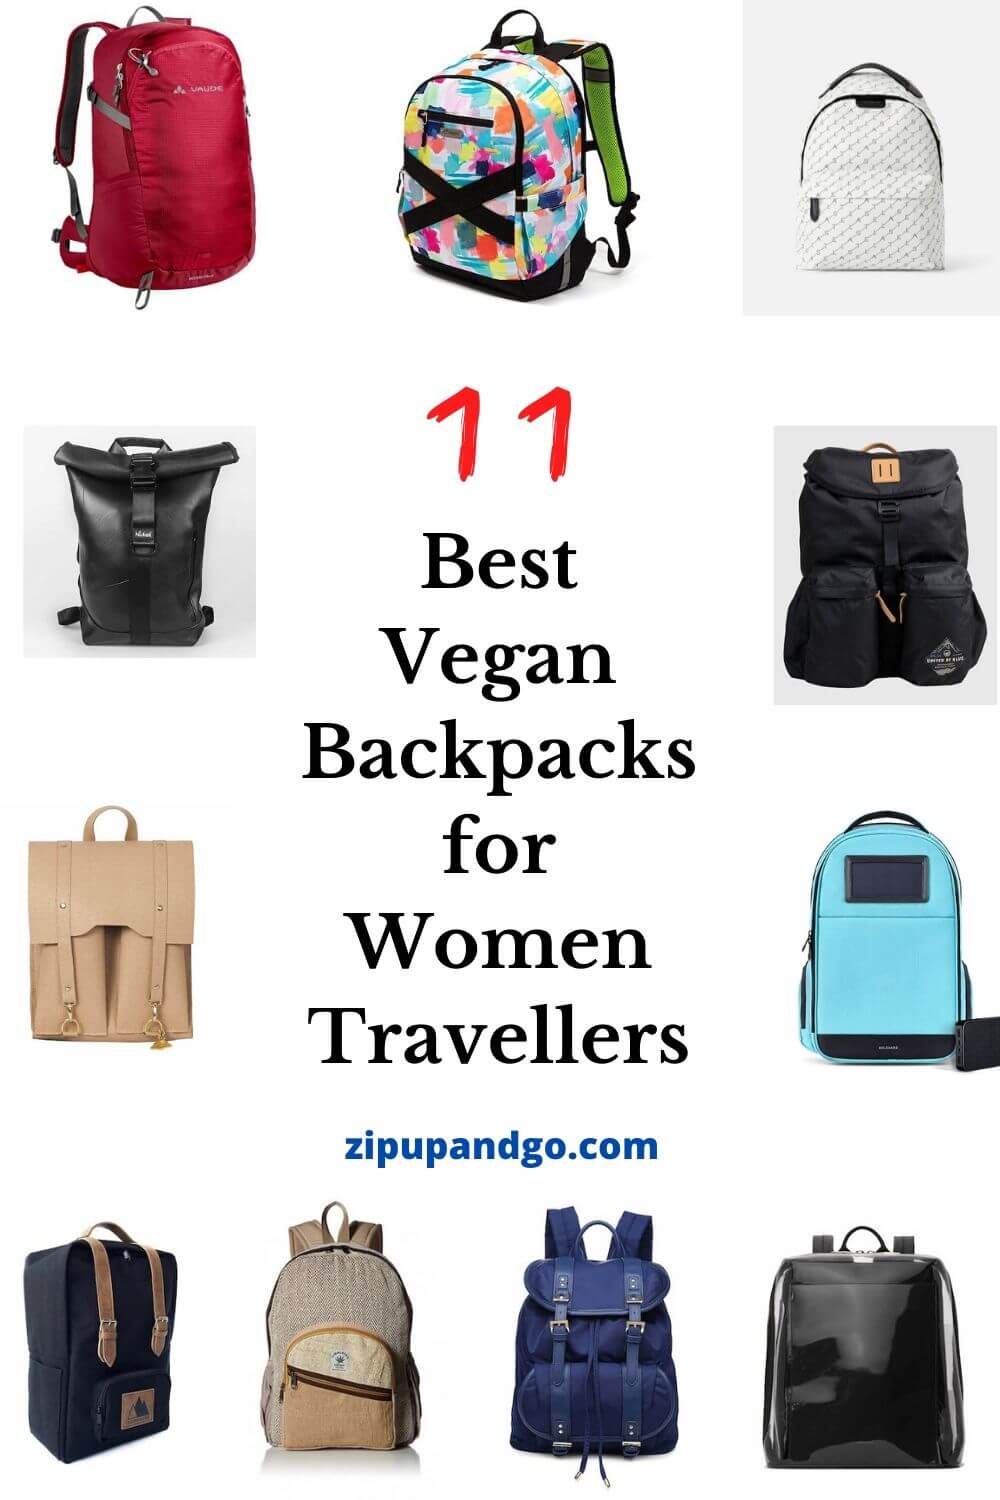 11 Of The Best Vegan Backpacks For Women Travellers - Zip Up And Go!